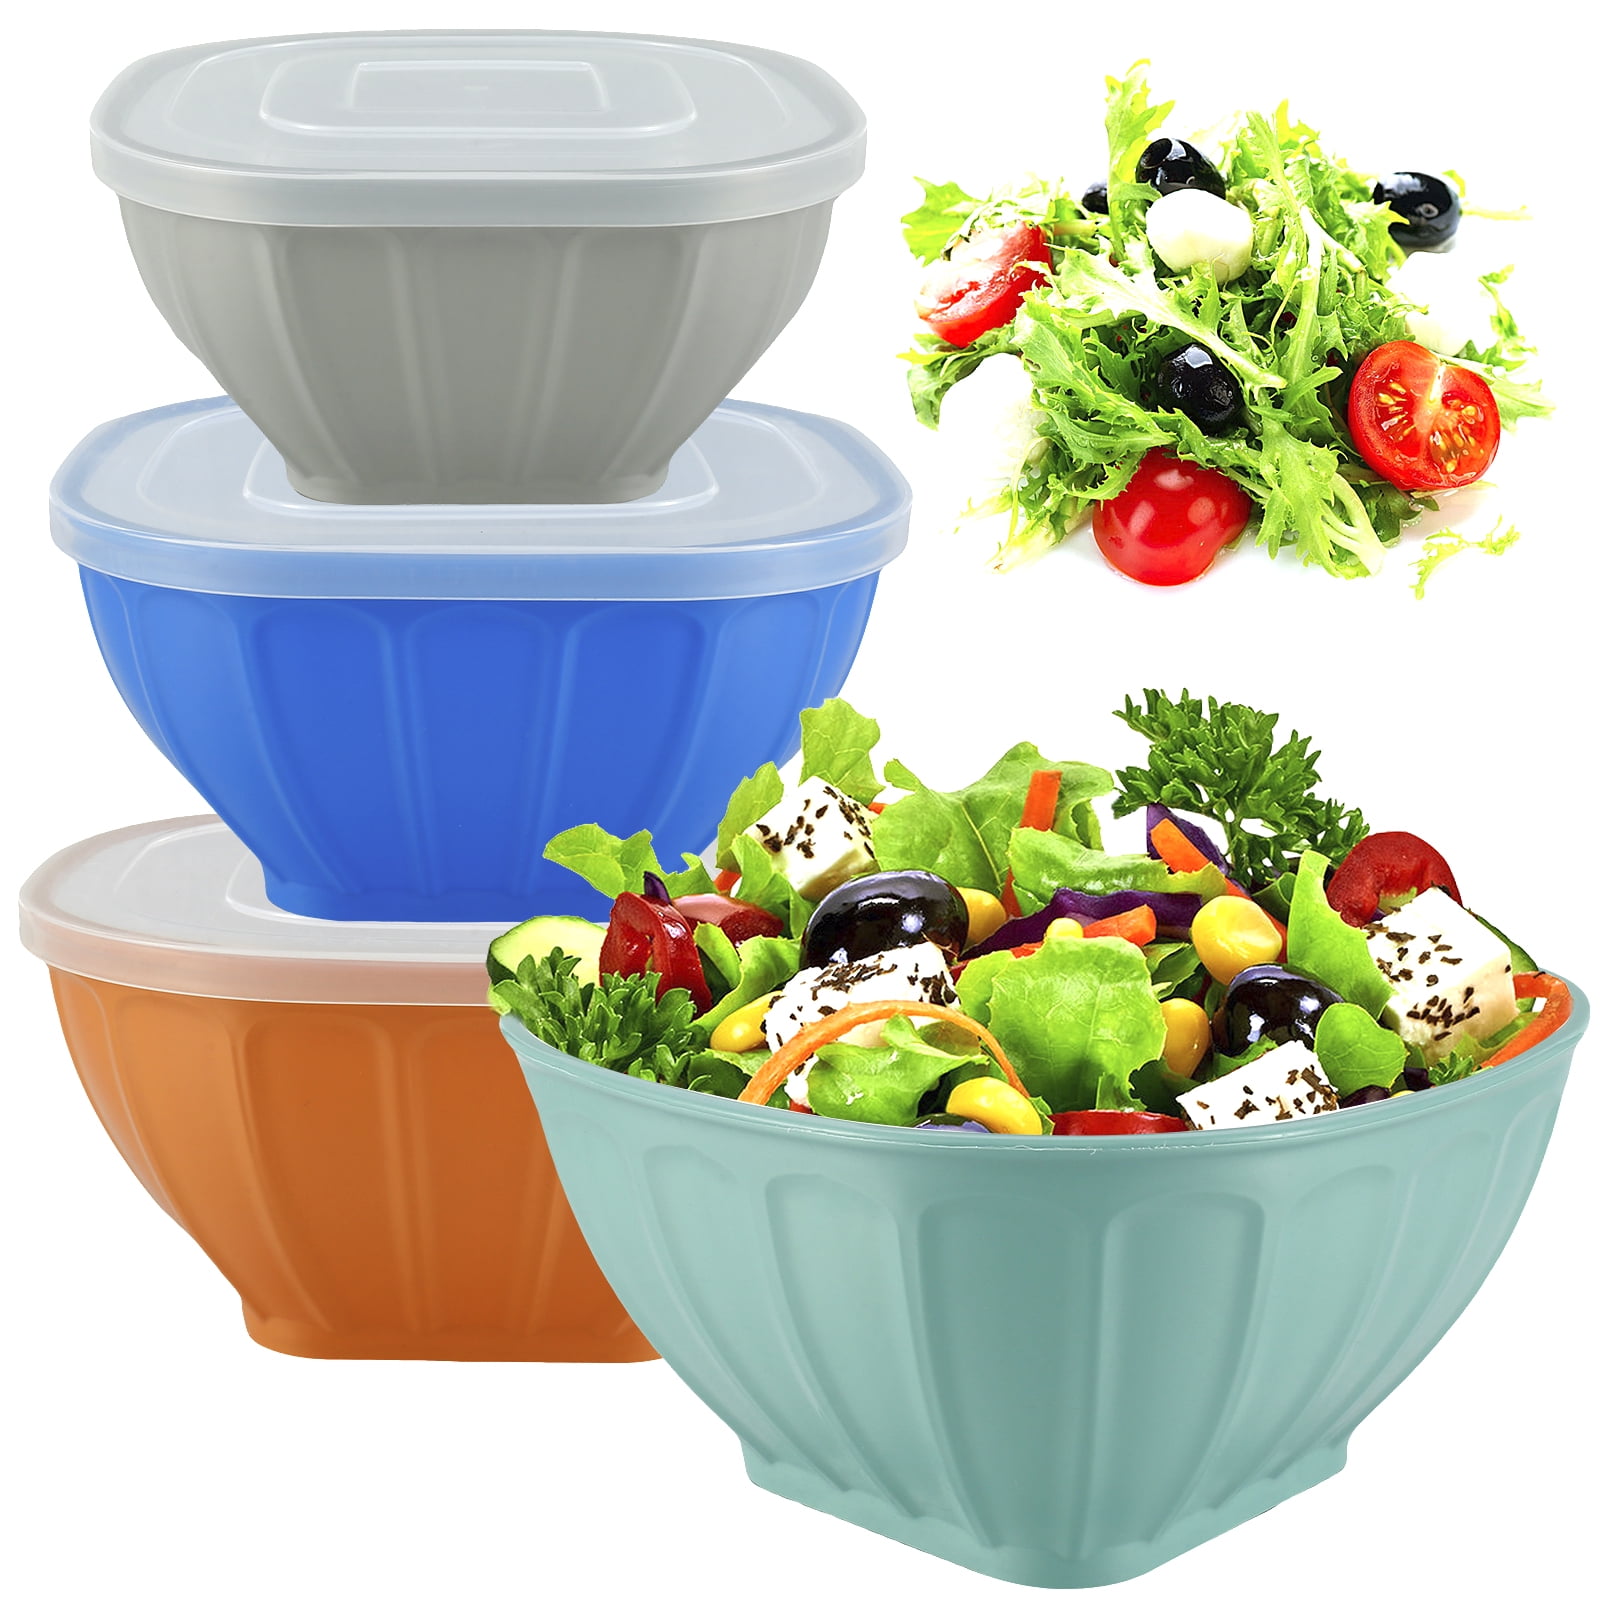 Wharick Square Plastic Bowl With Lids, Reusable, for Party Snack or Salad  Bowl, Chip Bowls, Snack Bowls, Candy Dish, Salad Container 